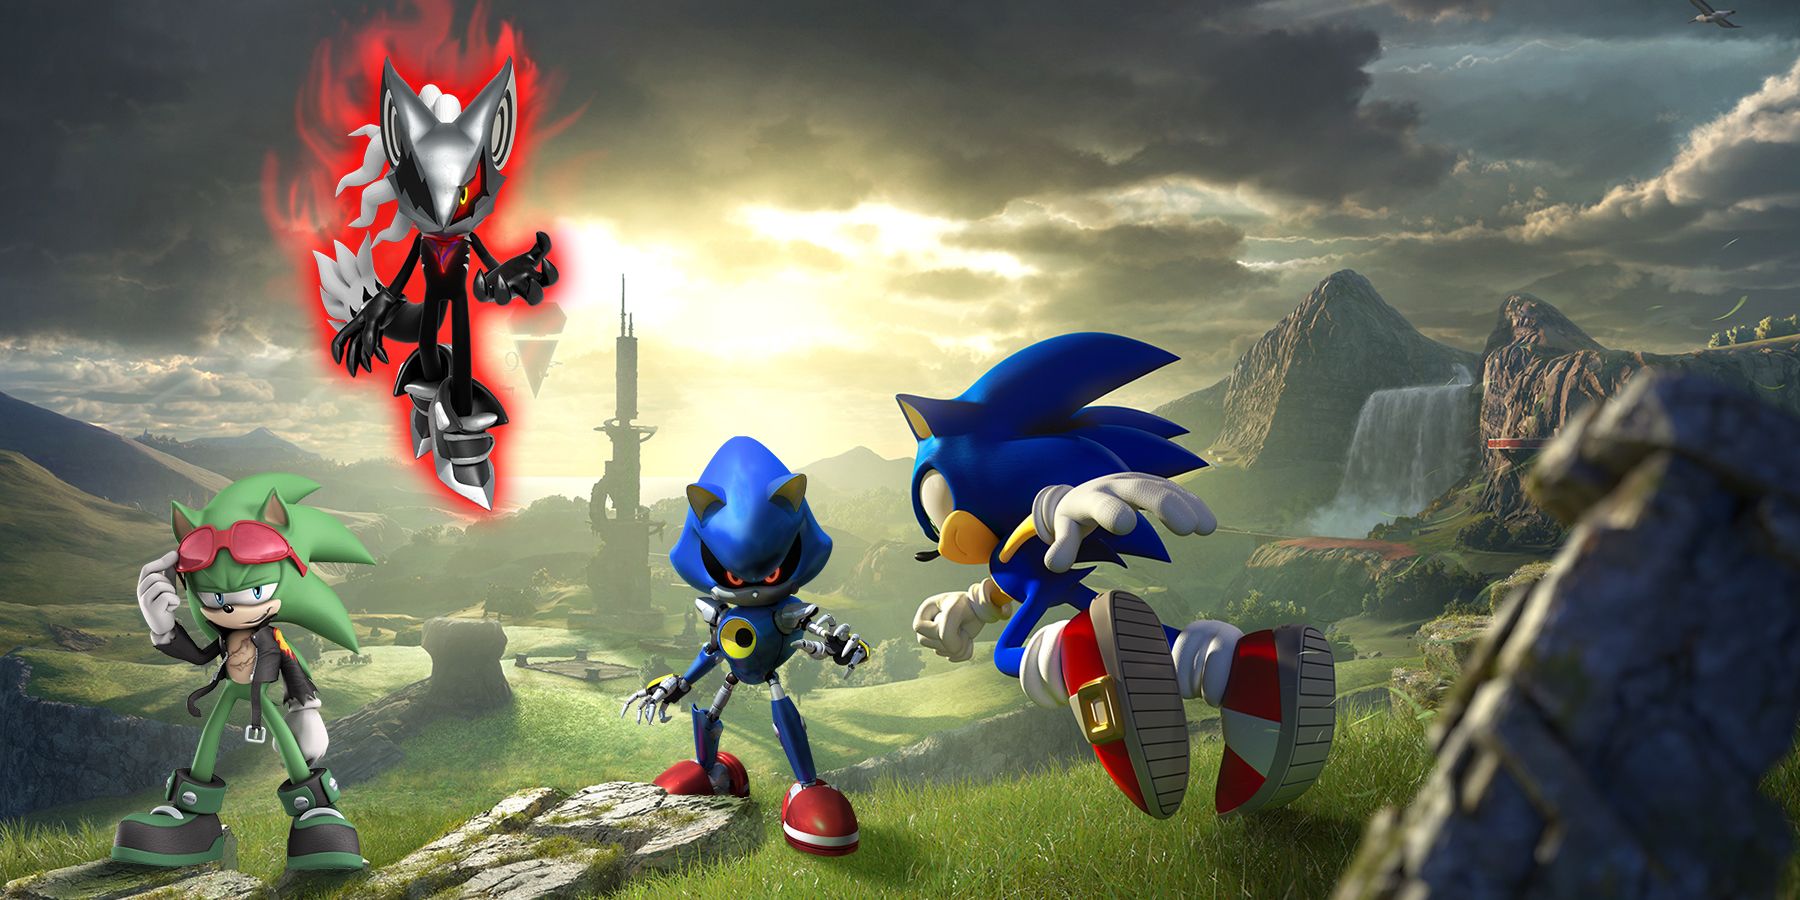 Infinite, Scourge, and Metal Sonic are among the 14 Strongest Sonic The Hedgehog Villians